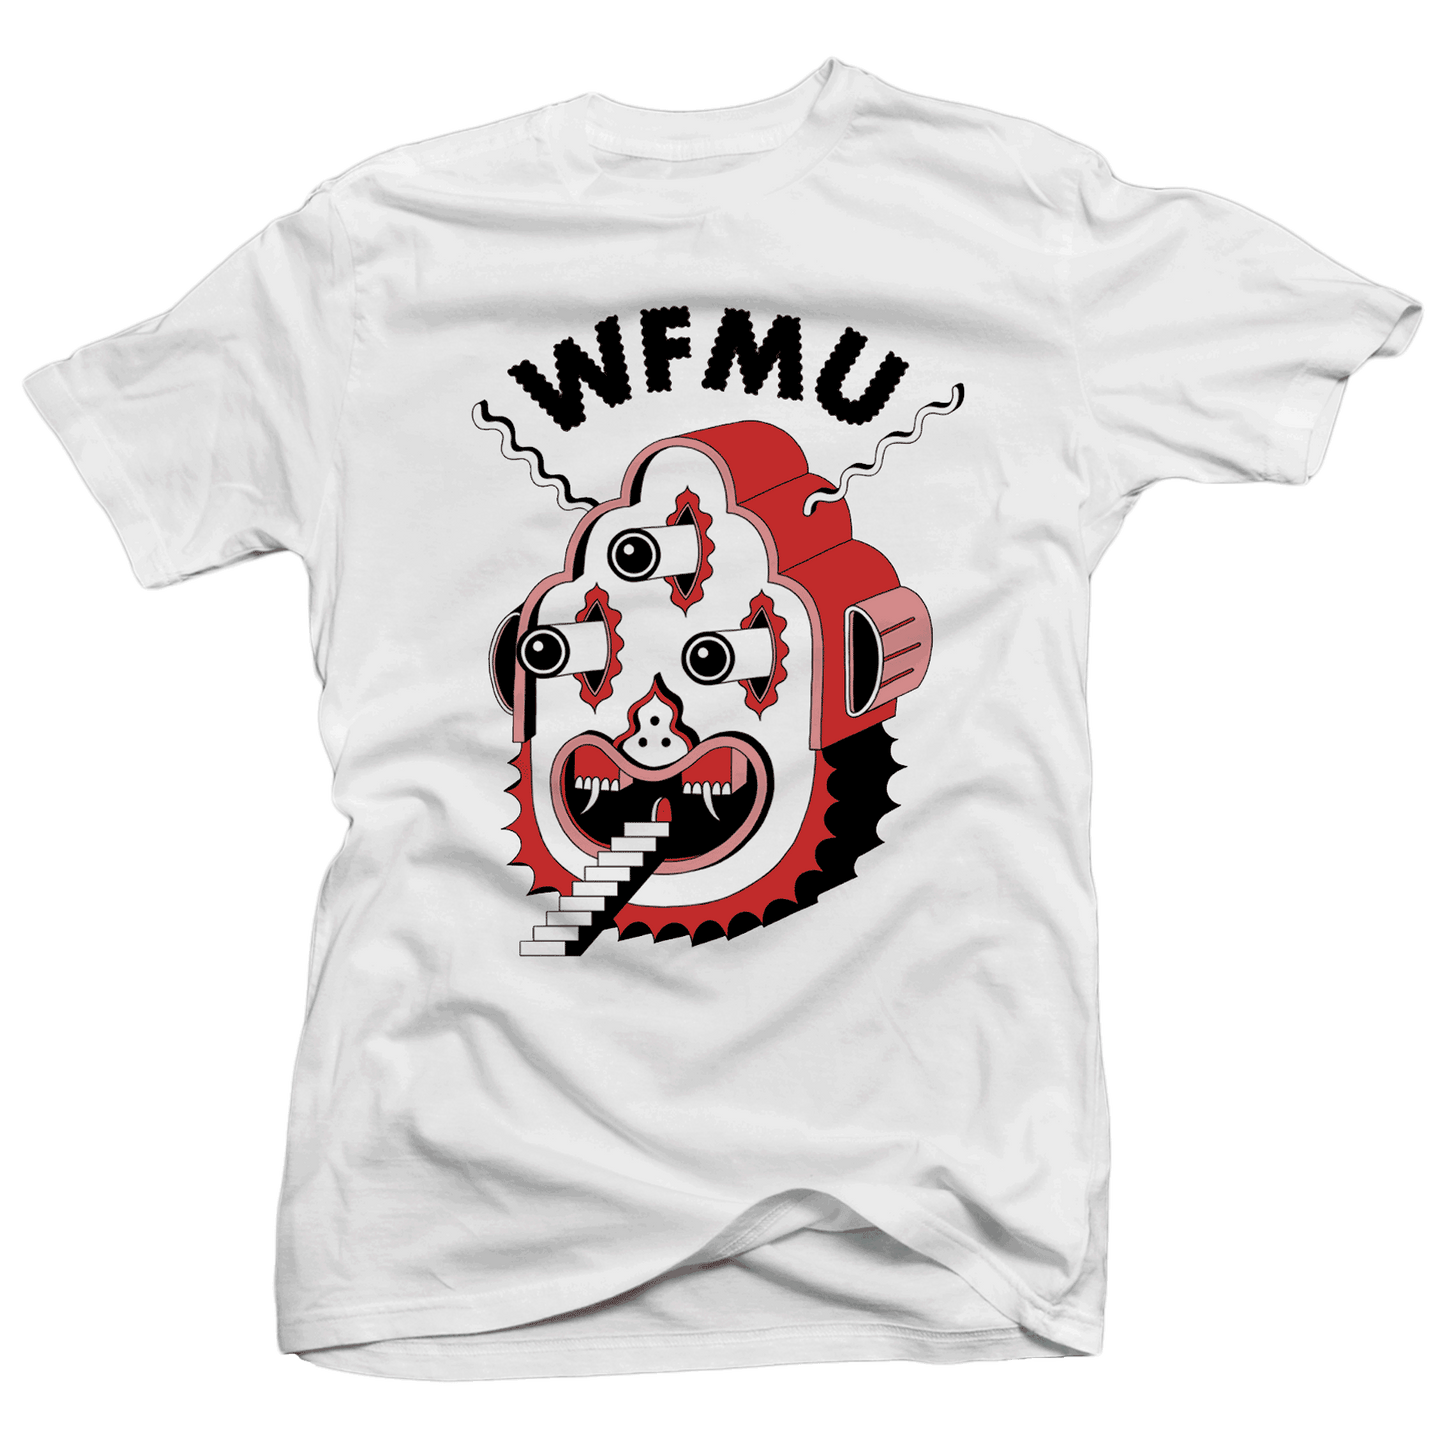 Japanese Funhouse T-Shirt - Women's M Only